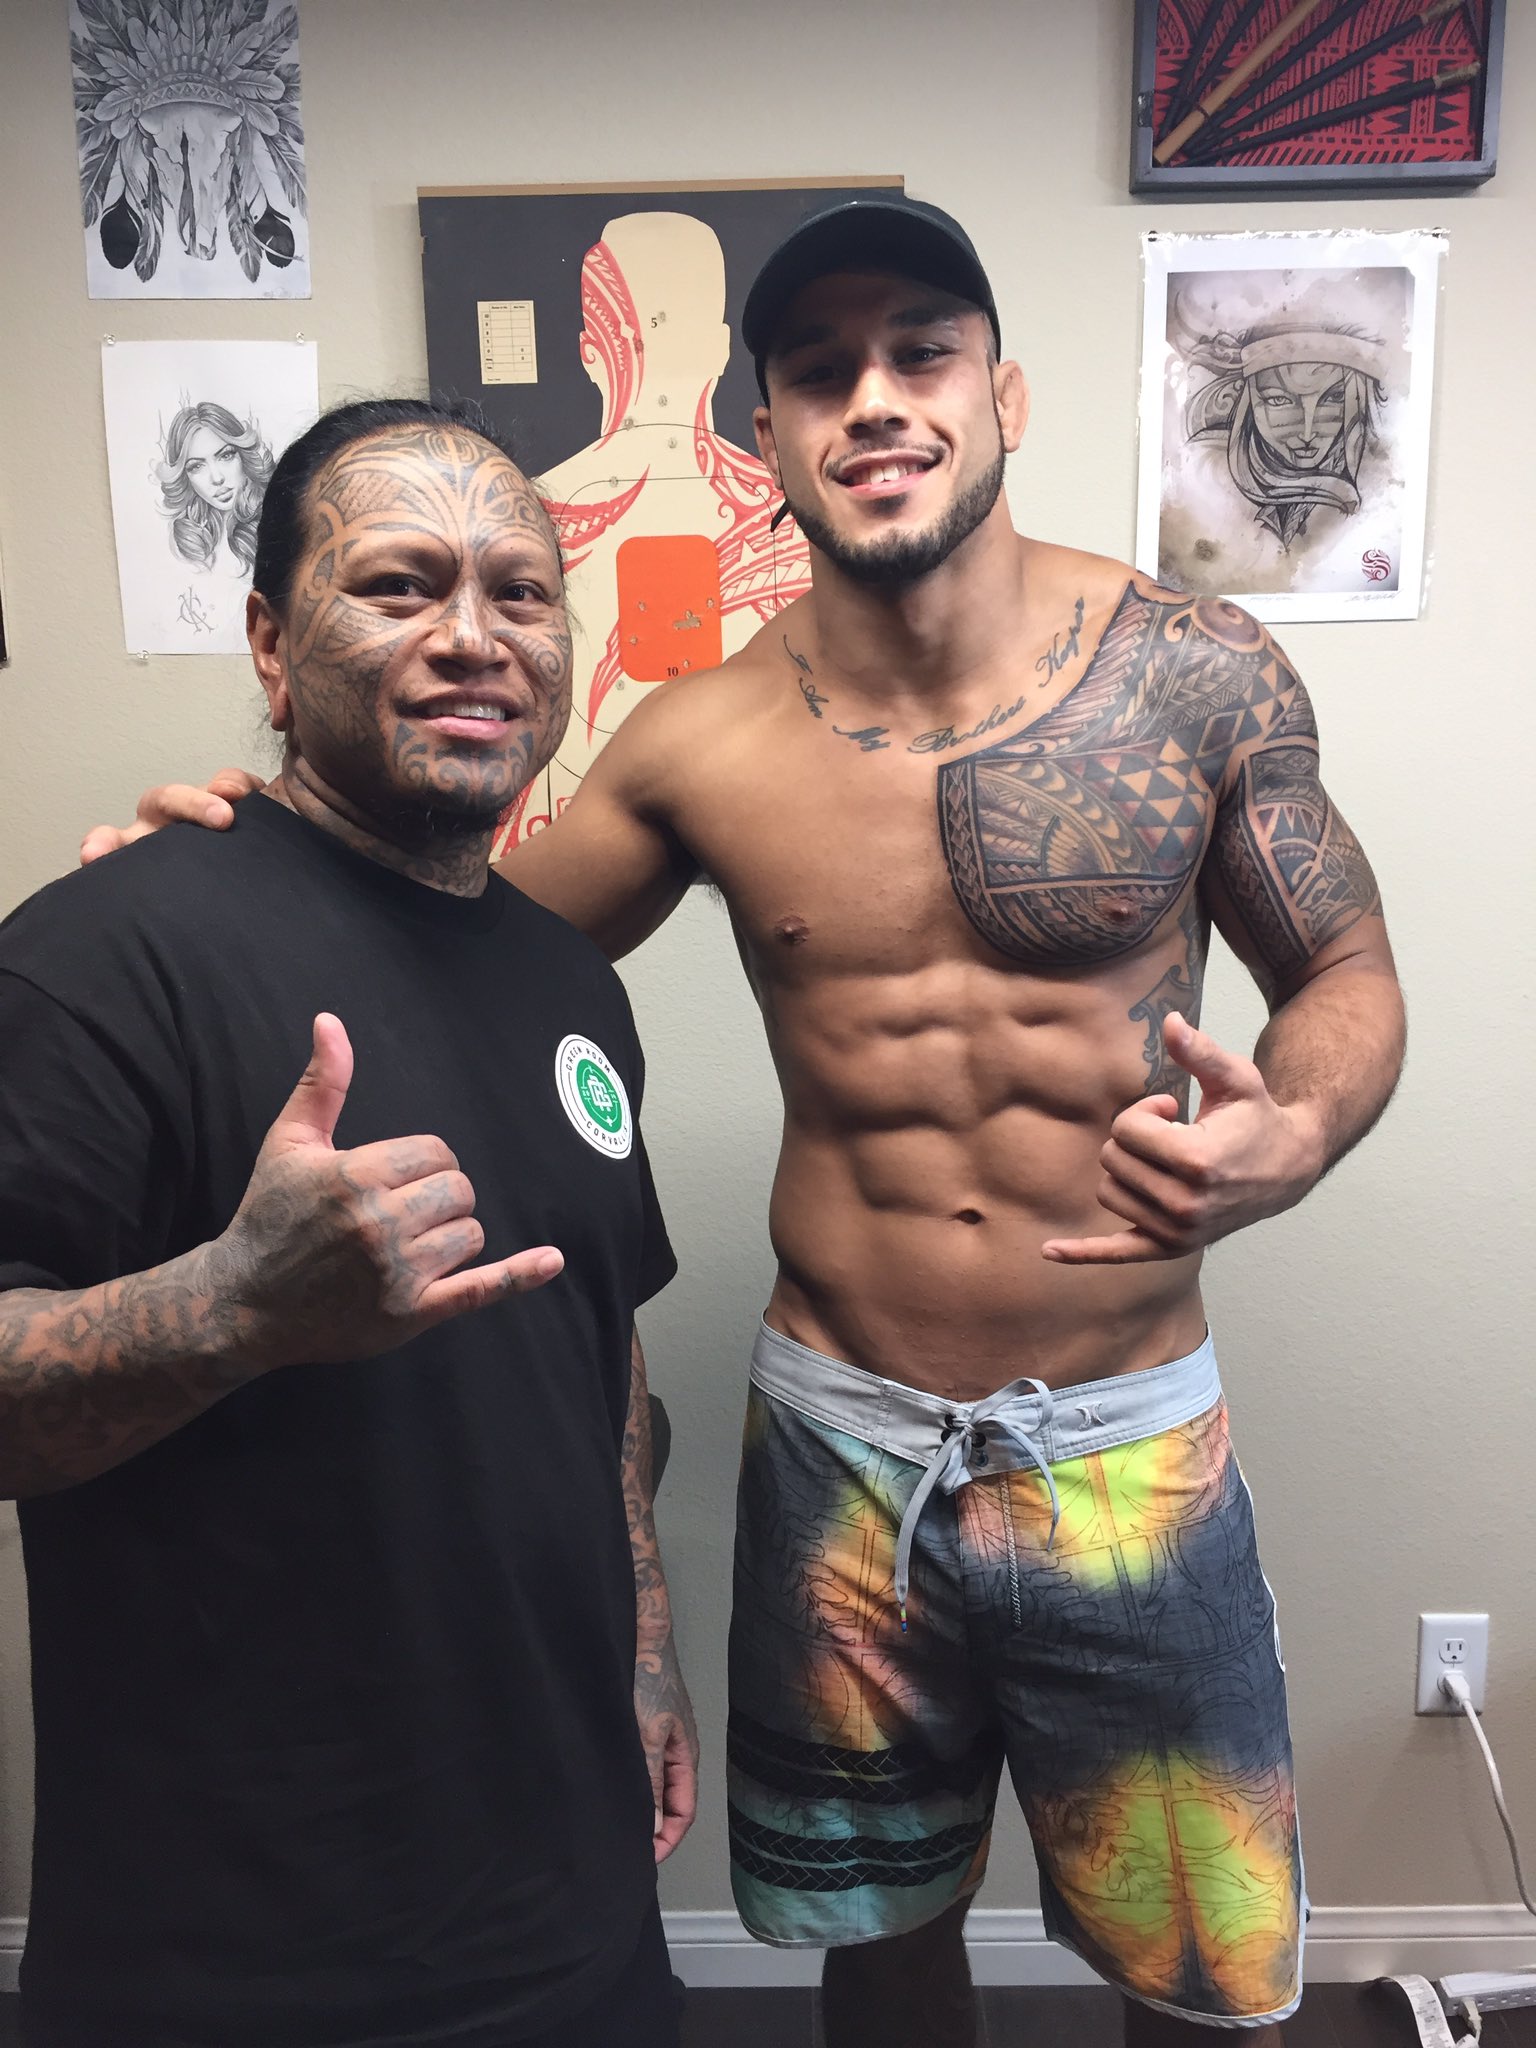 Brad Tavares on X: Just got some work done by @TattoosByBONG hit